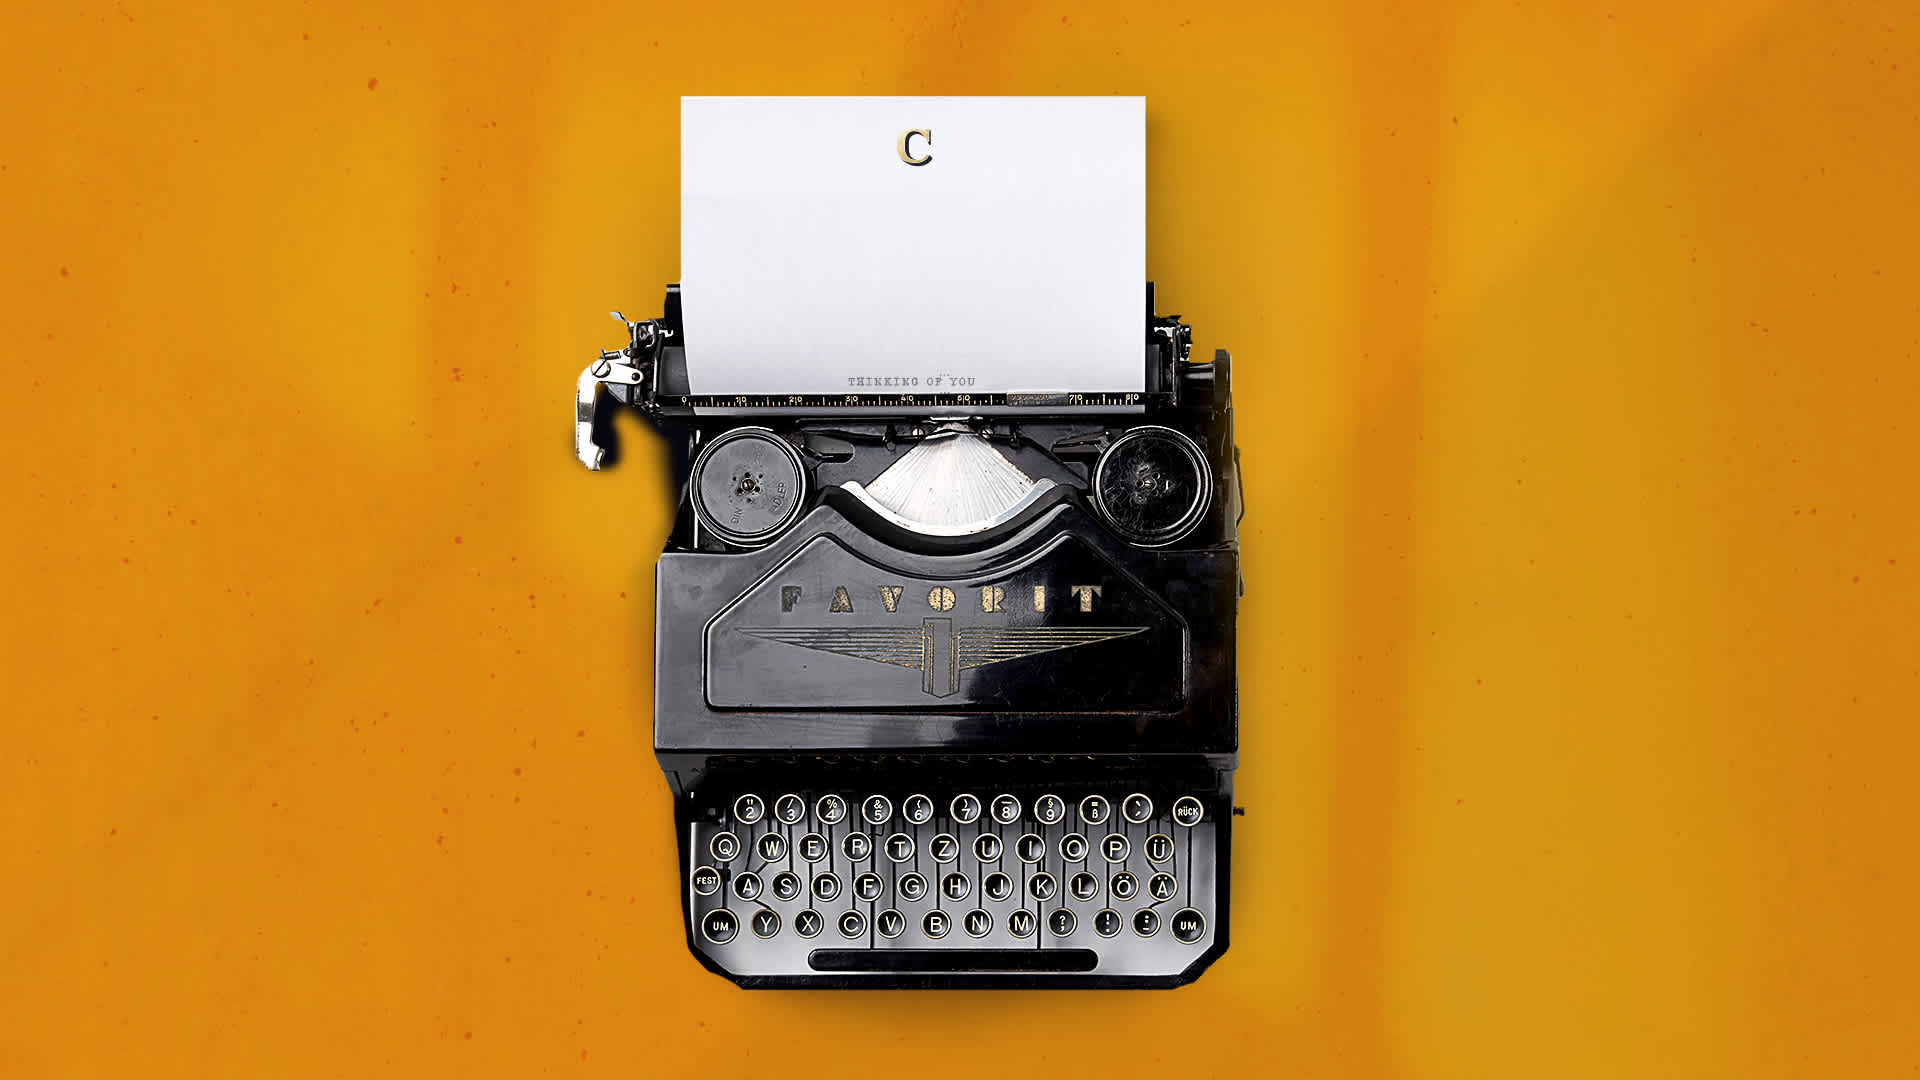 A typewriter with The Commoner logo on the paper and a yellow background with light streaks.